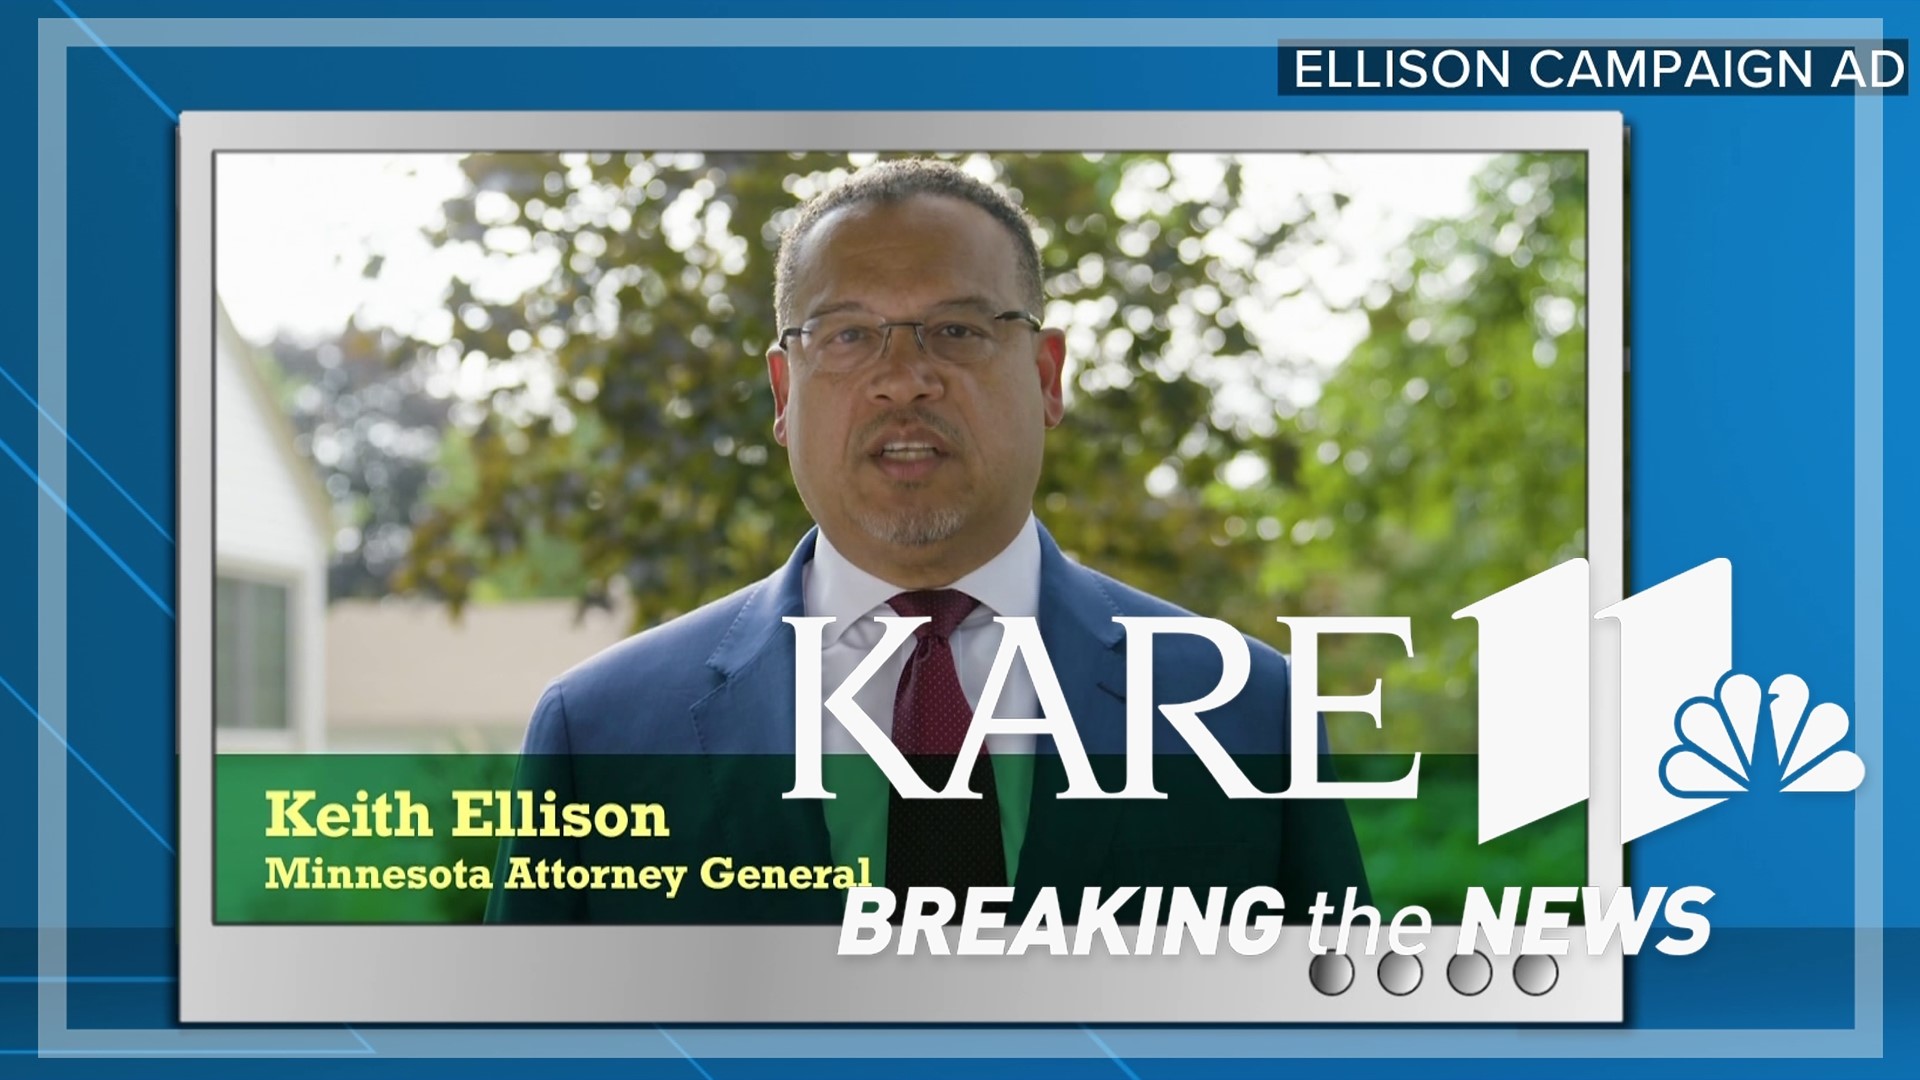 Attorney General Keith Ellison's first big campaign ad buy focuses on his work as a prosecutor, as Republicans try to blame Democrats for the current crime wave.